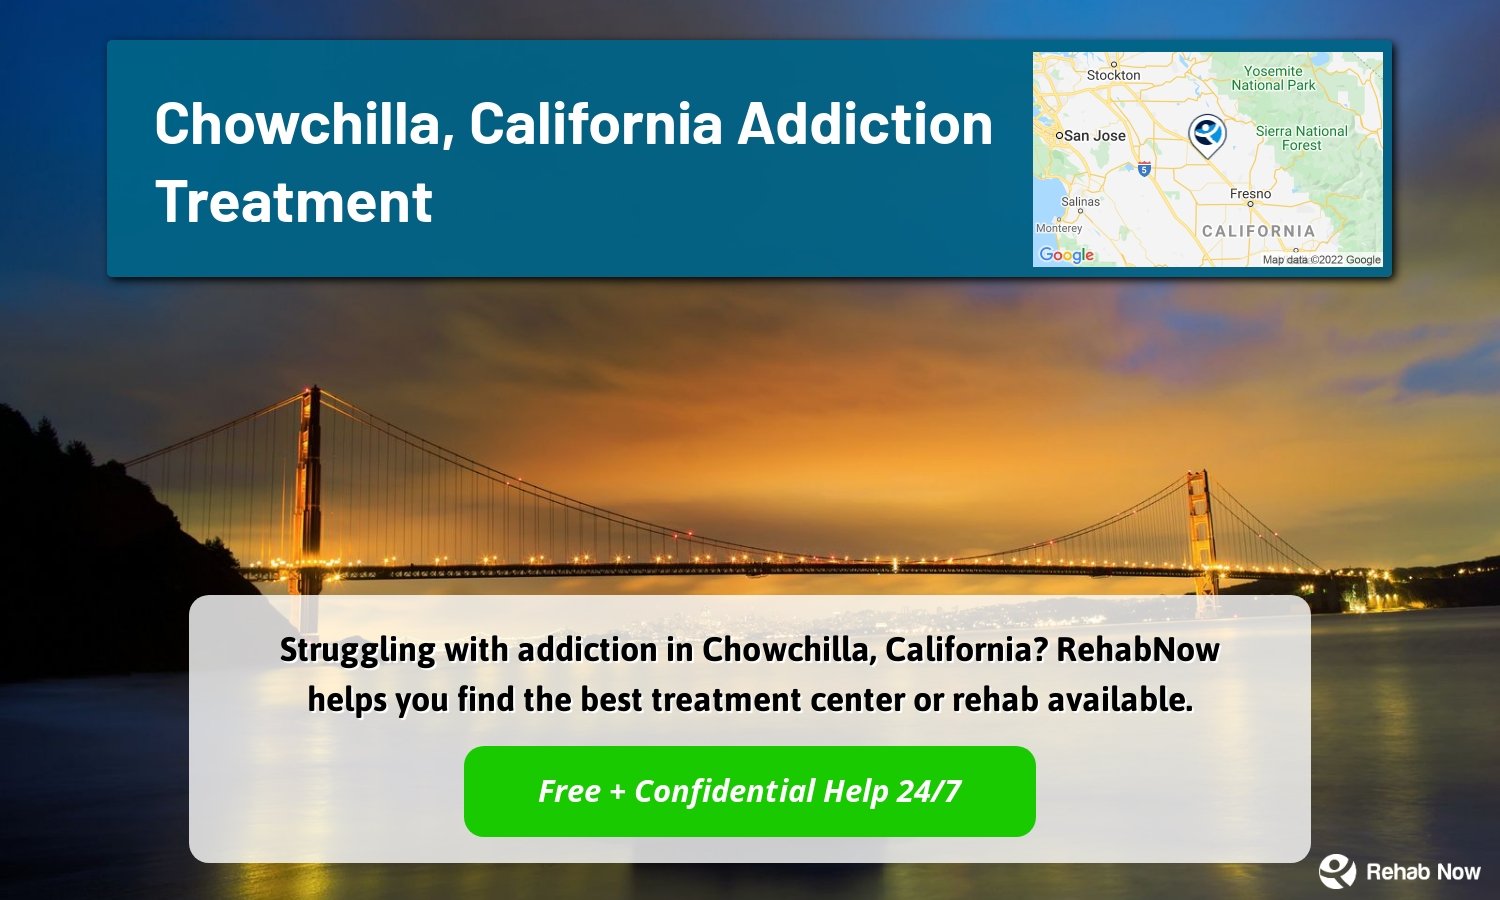 Struggling with addiction in Chowchilla, California? RehabNow helps you find the best treatment center or rehab available.